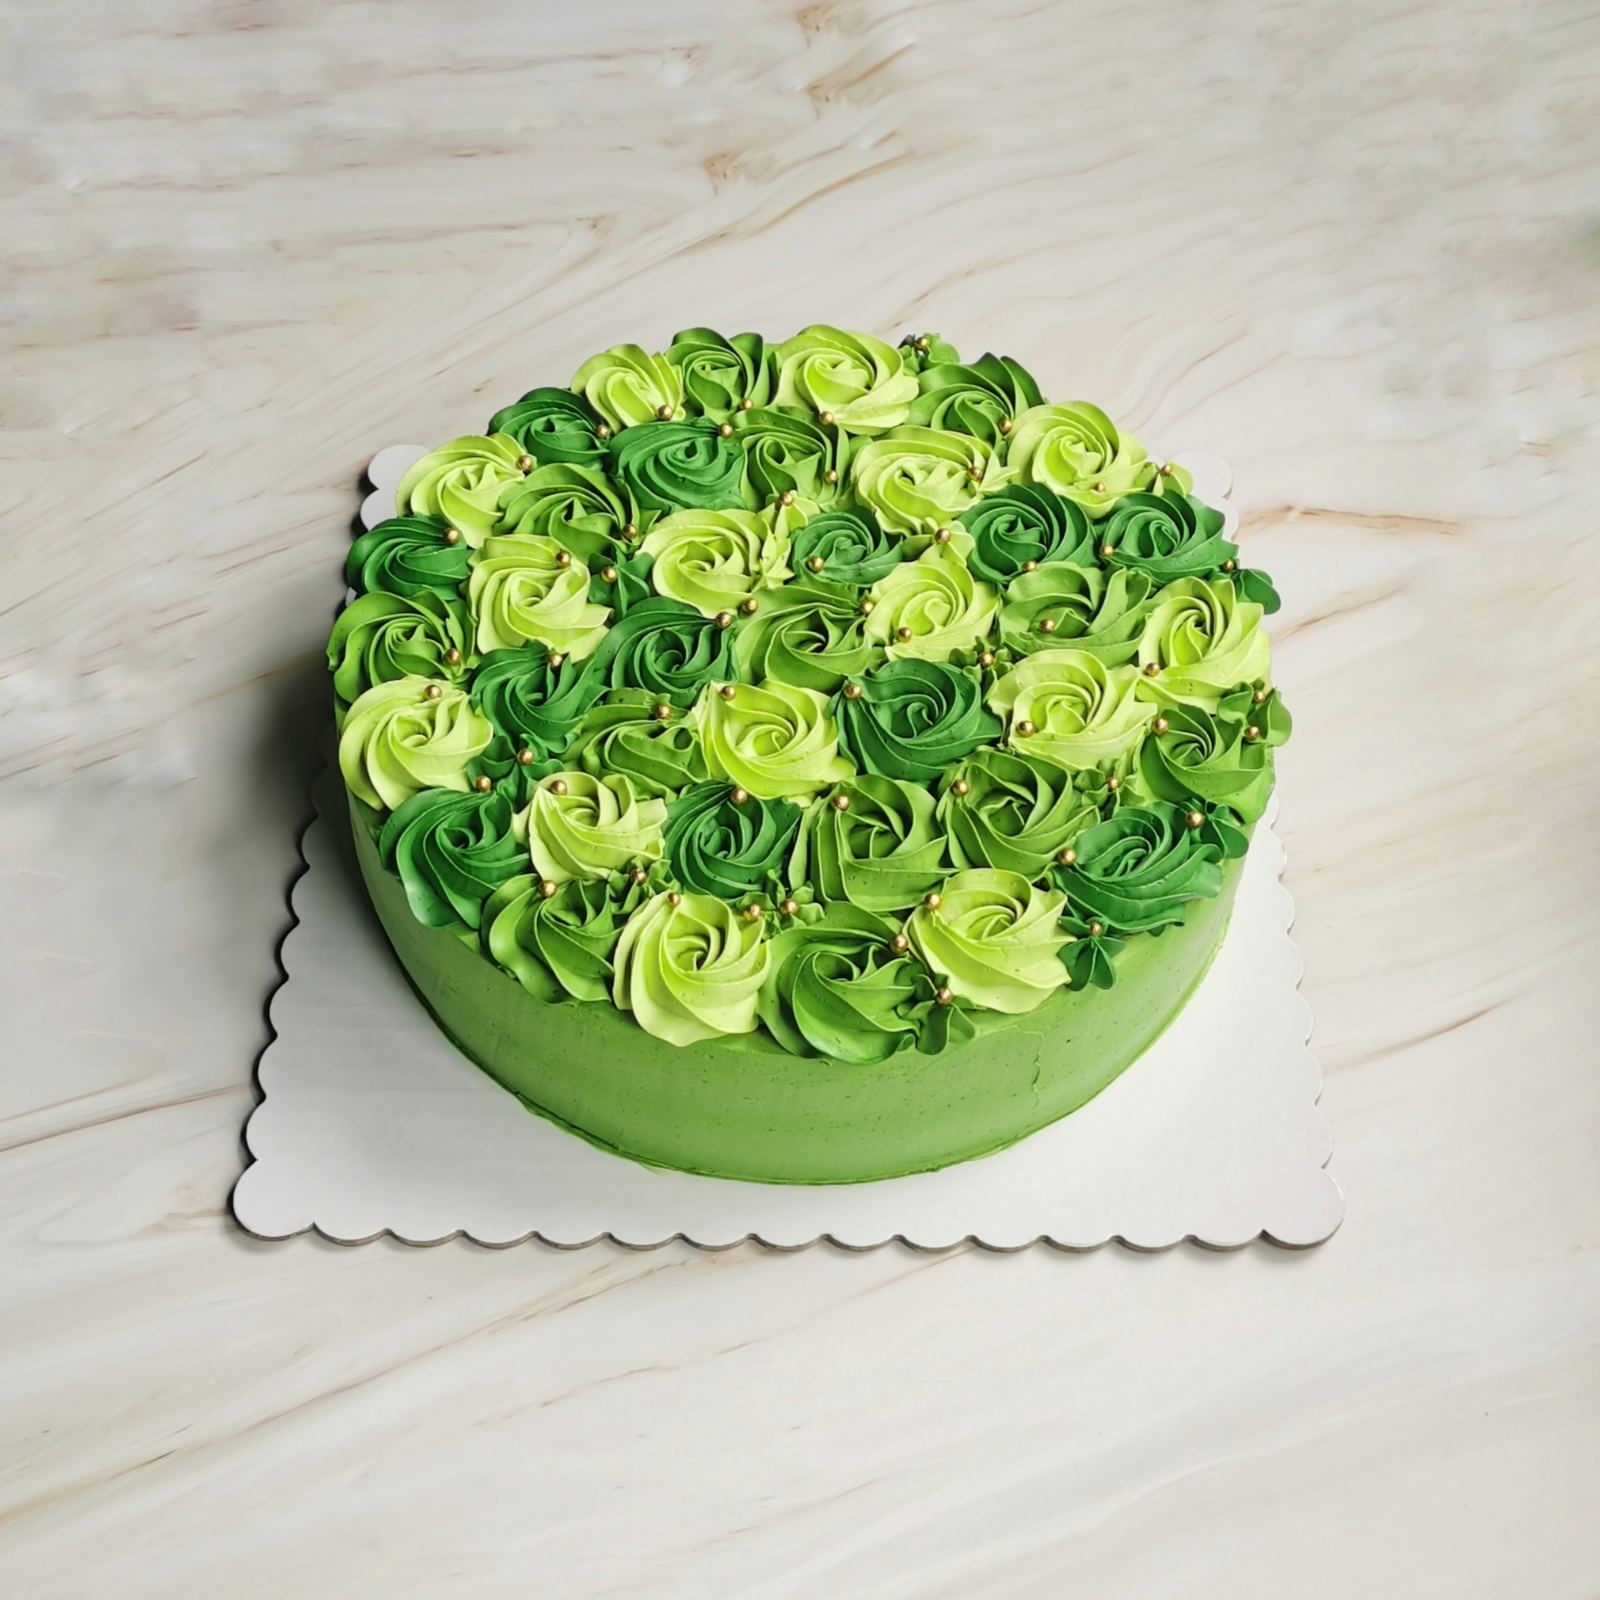 Buy Heart shaped flower Cake Online at Best Price | Od